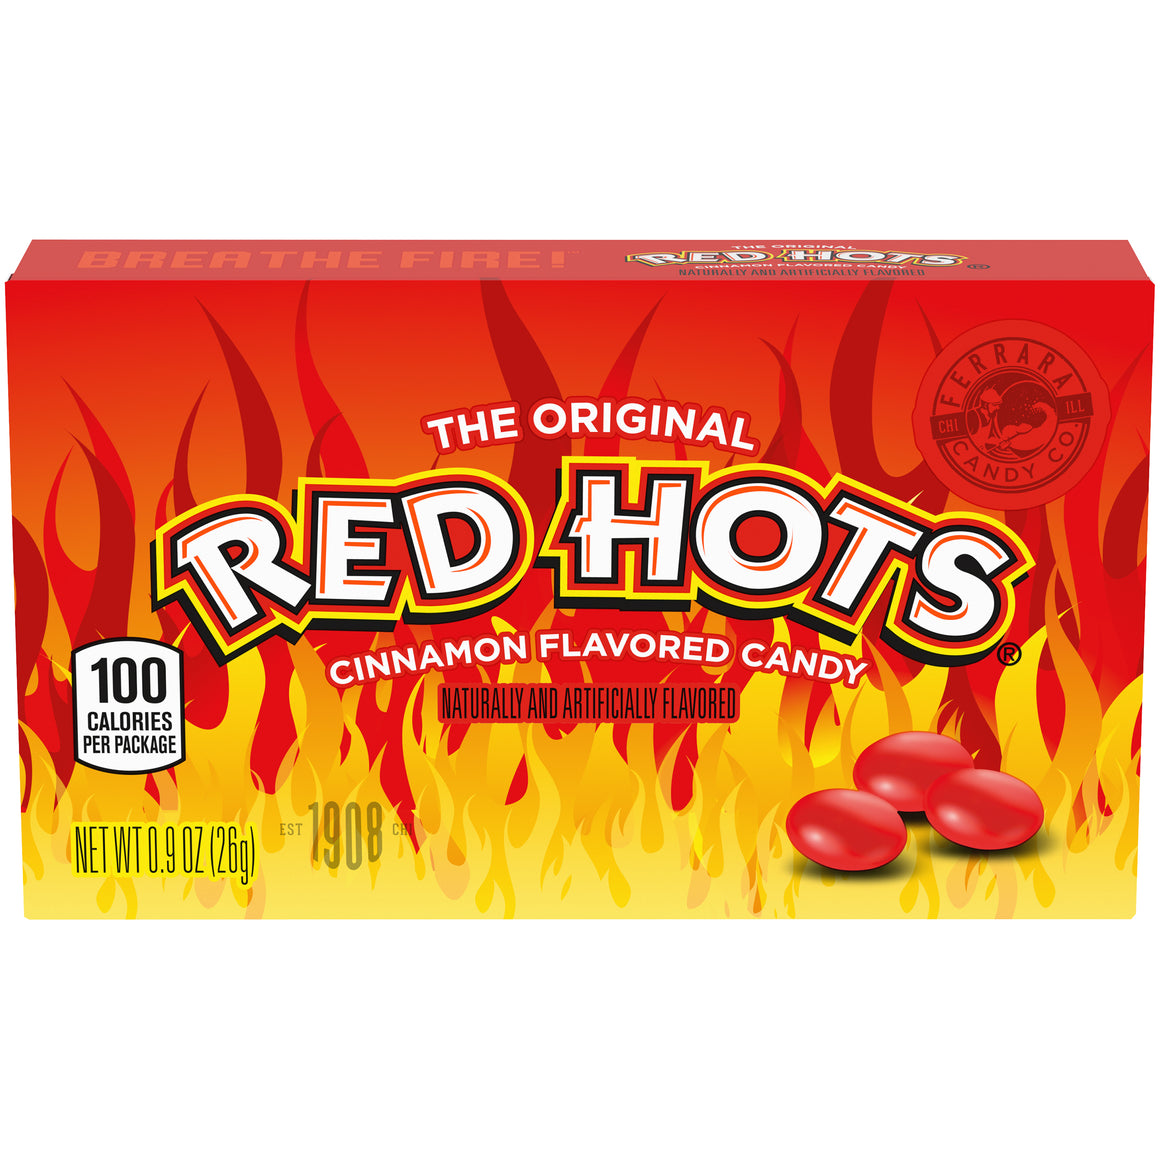 All City Candy Red Hots Original Cinnamon Candy 0.9-oz. Box Case of 24 Hard Ferrara Candy Company For fresh candy and great service, visit www.allcitycandy.com